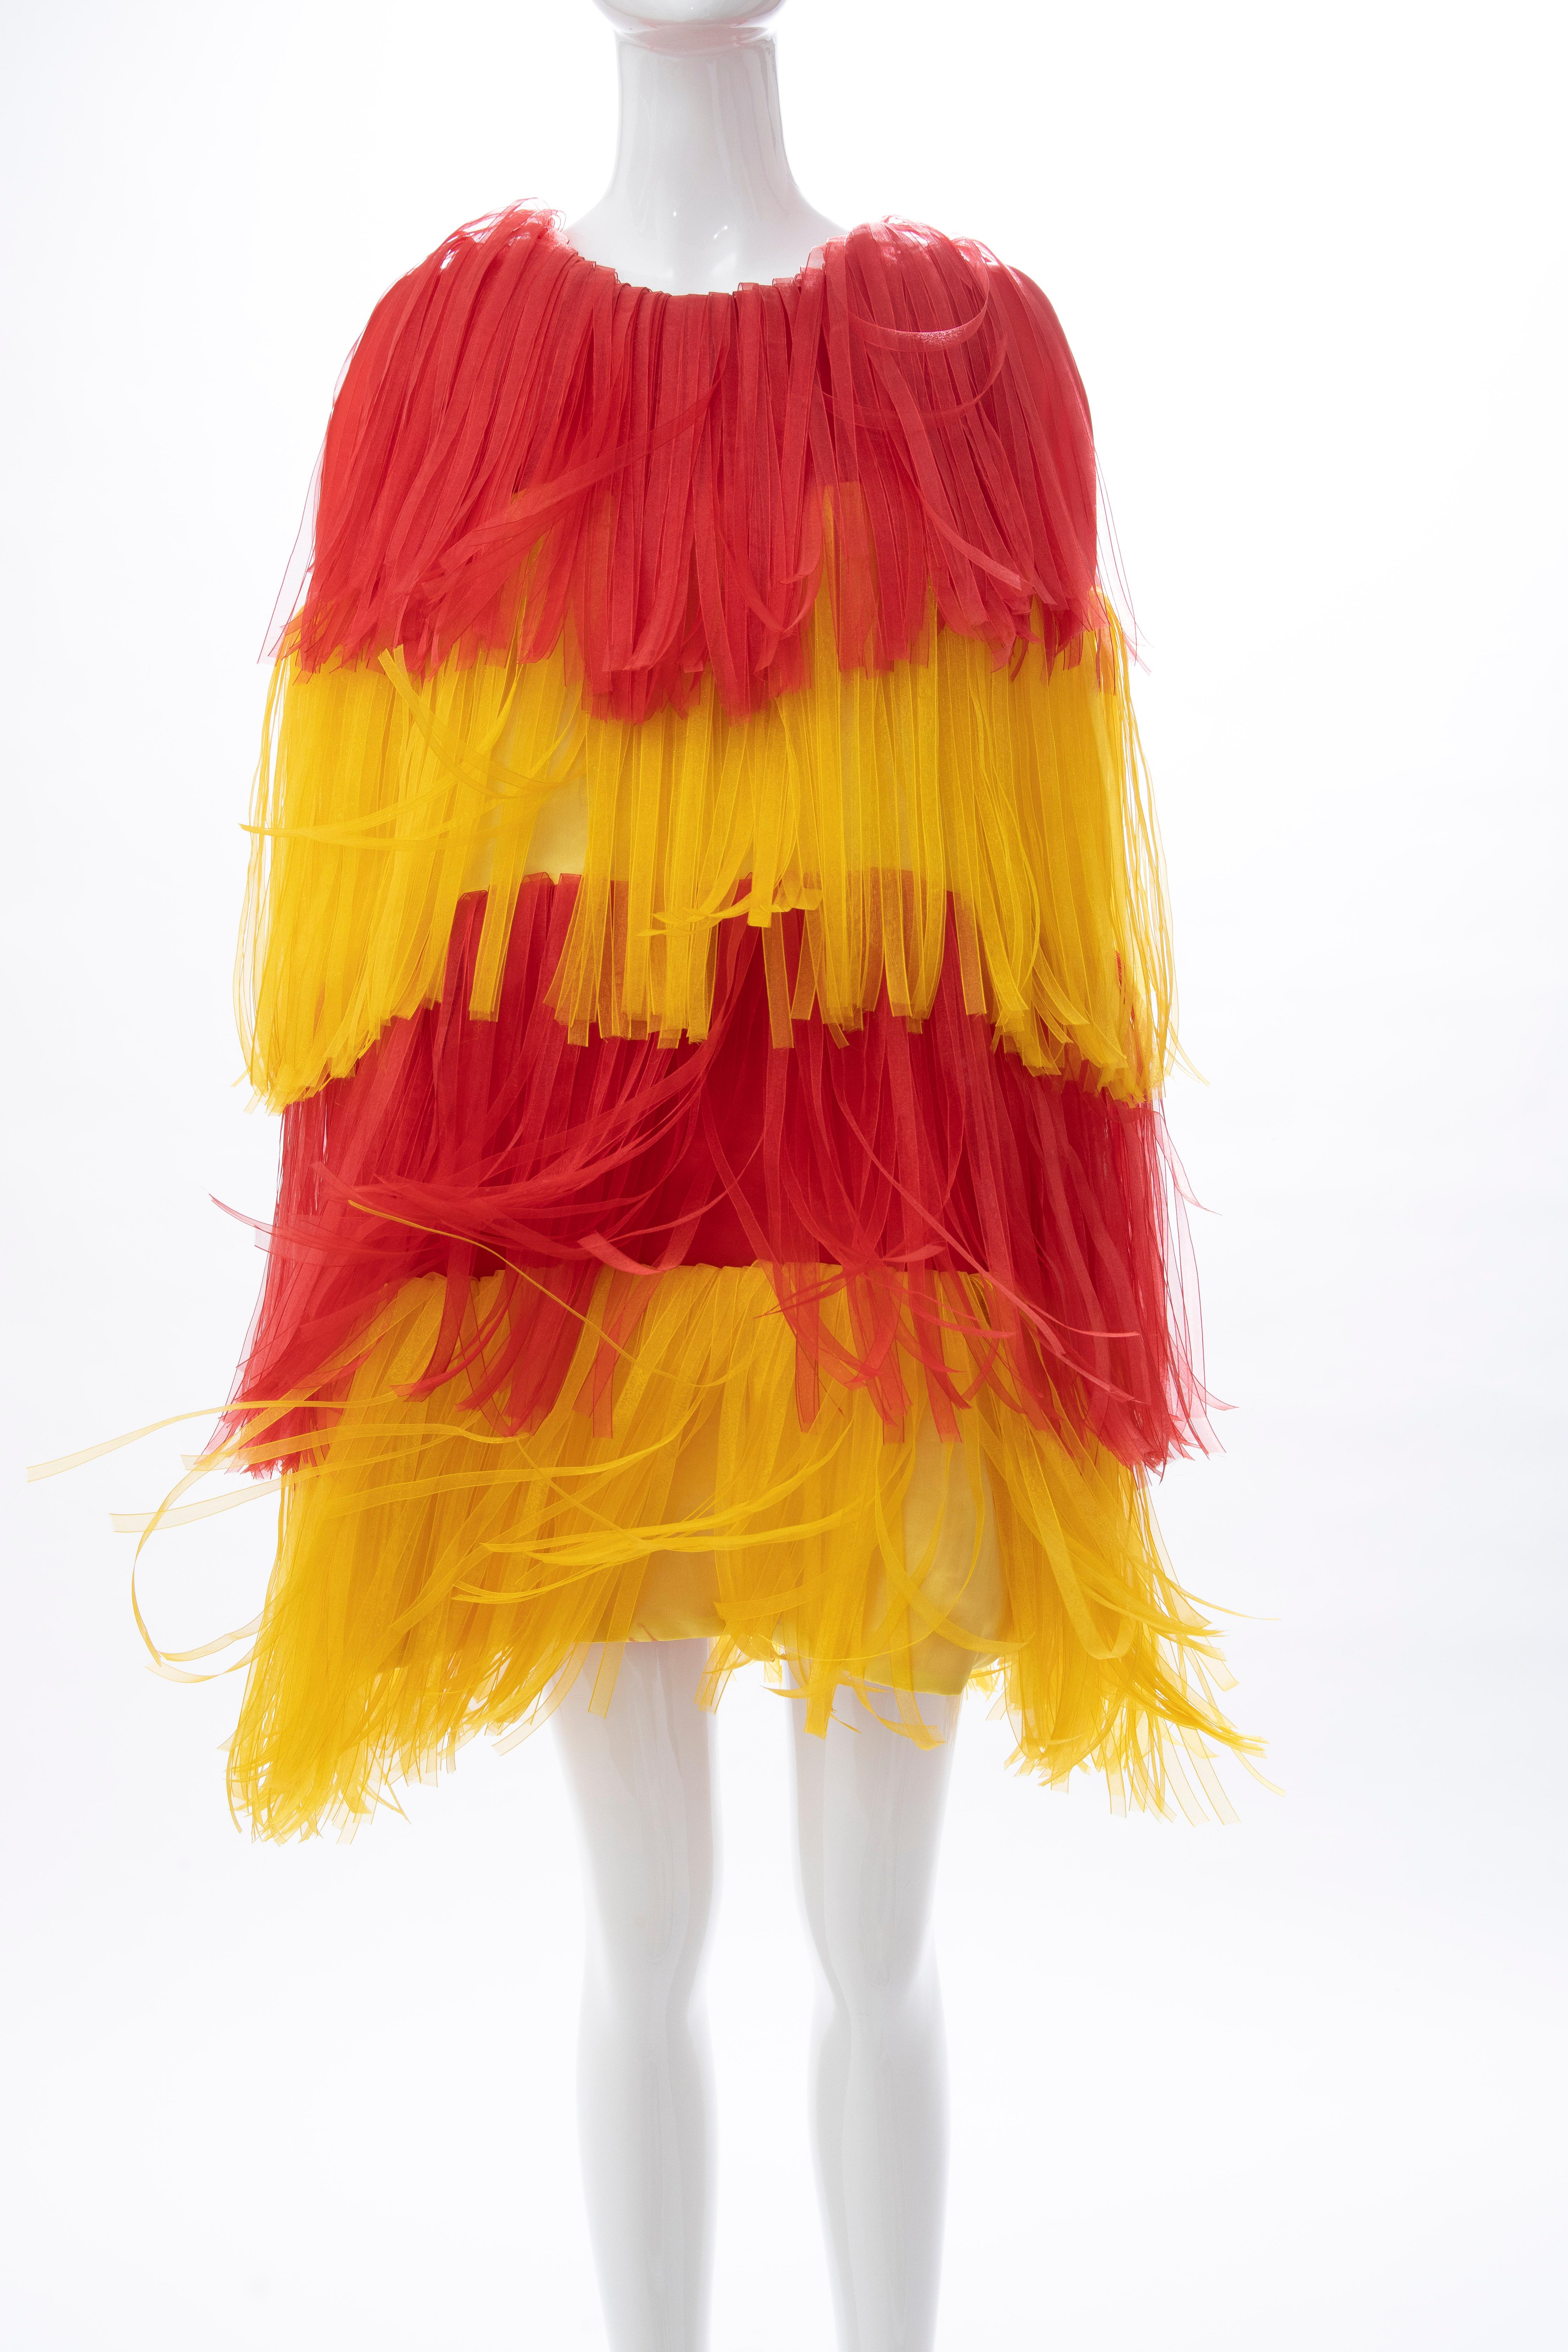 Moschino Couture Runway Silk Fringe Car Wash Evening Dress, Spring 2016 For Sale 6